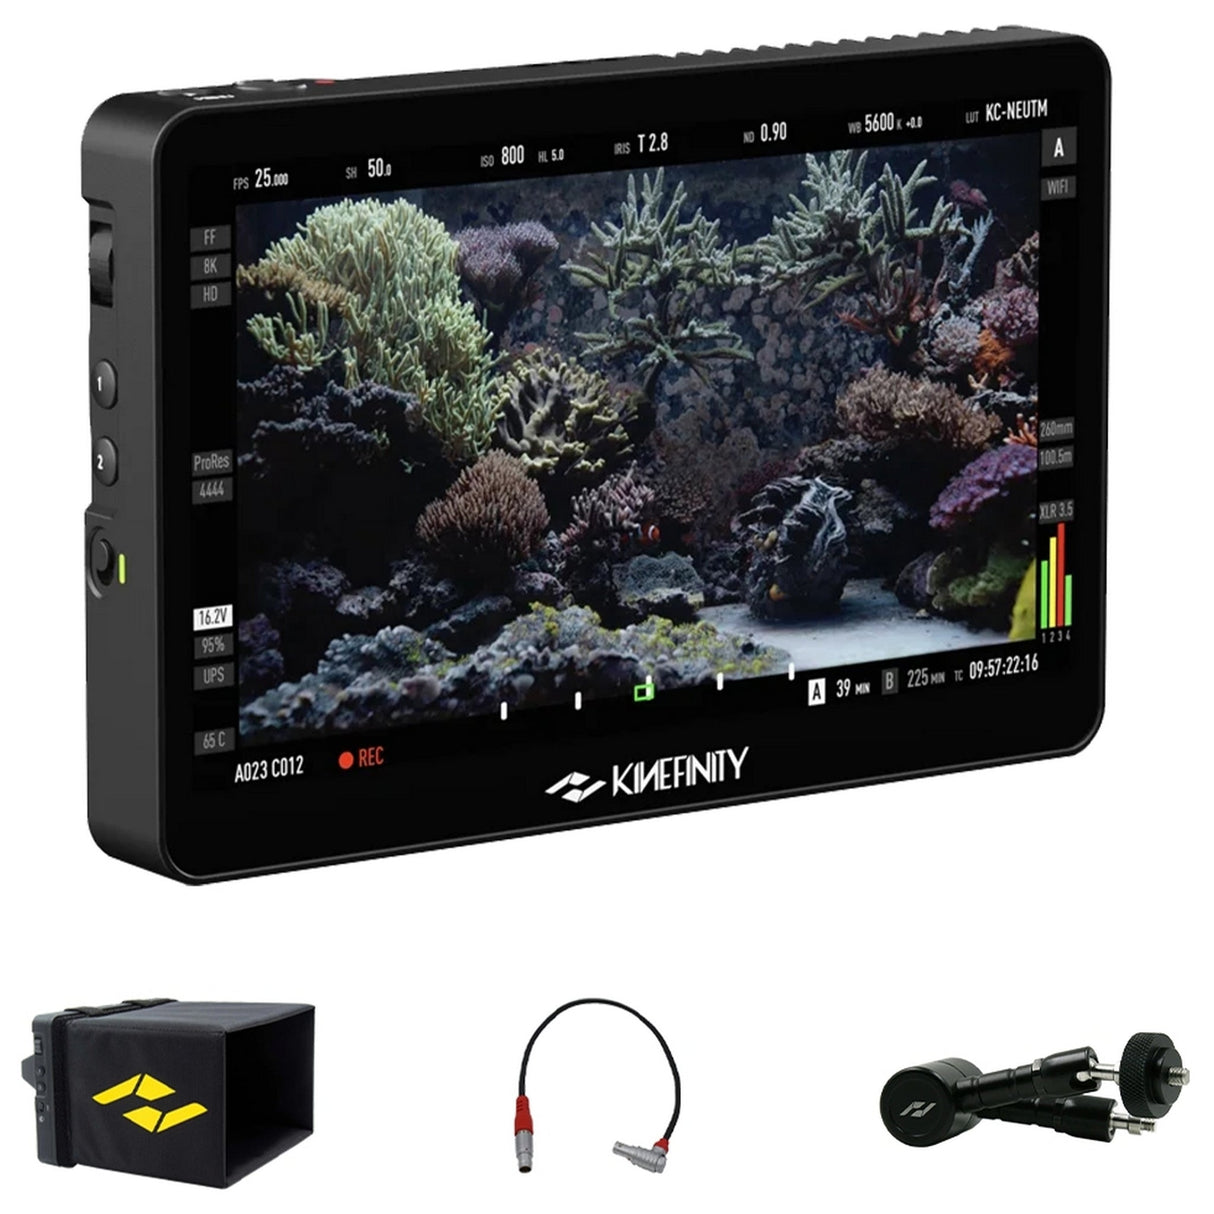 Kinefinity KineMON-7U2 1080p IPS LCD 7-Inch Ultra-Bright Touchscreen Monitor with Accessory Pack